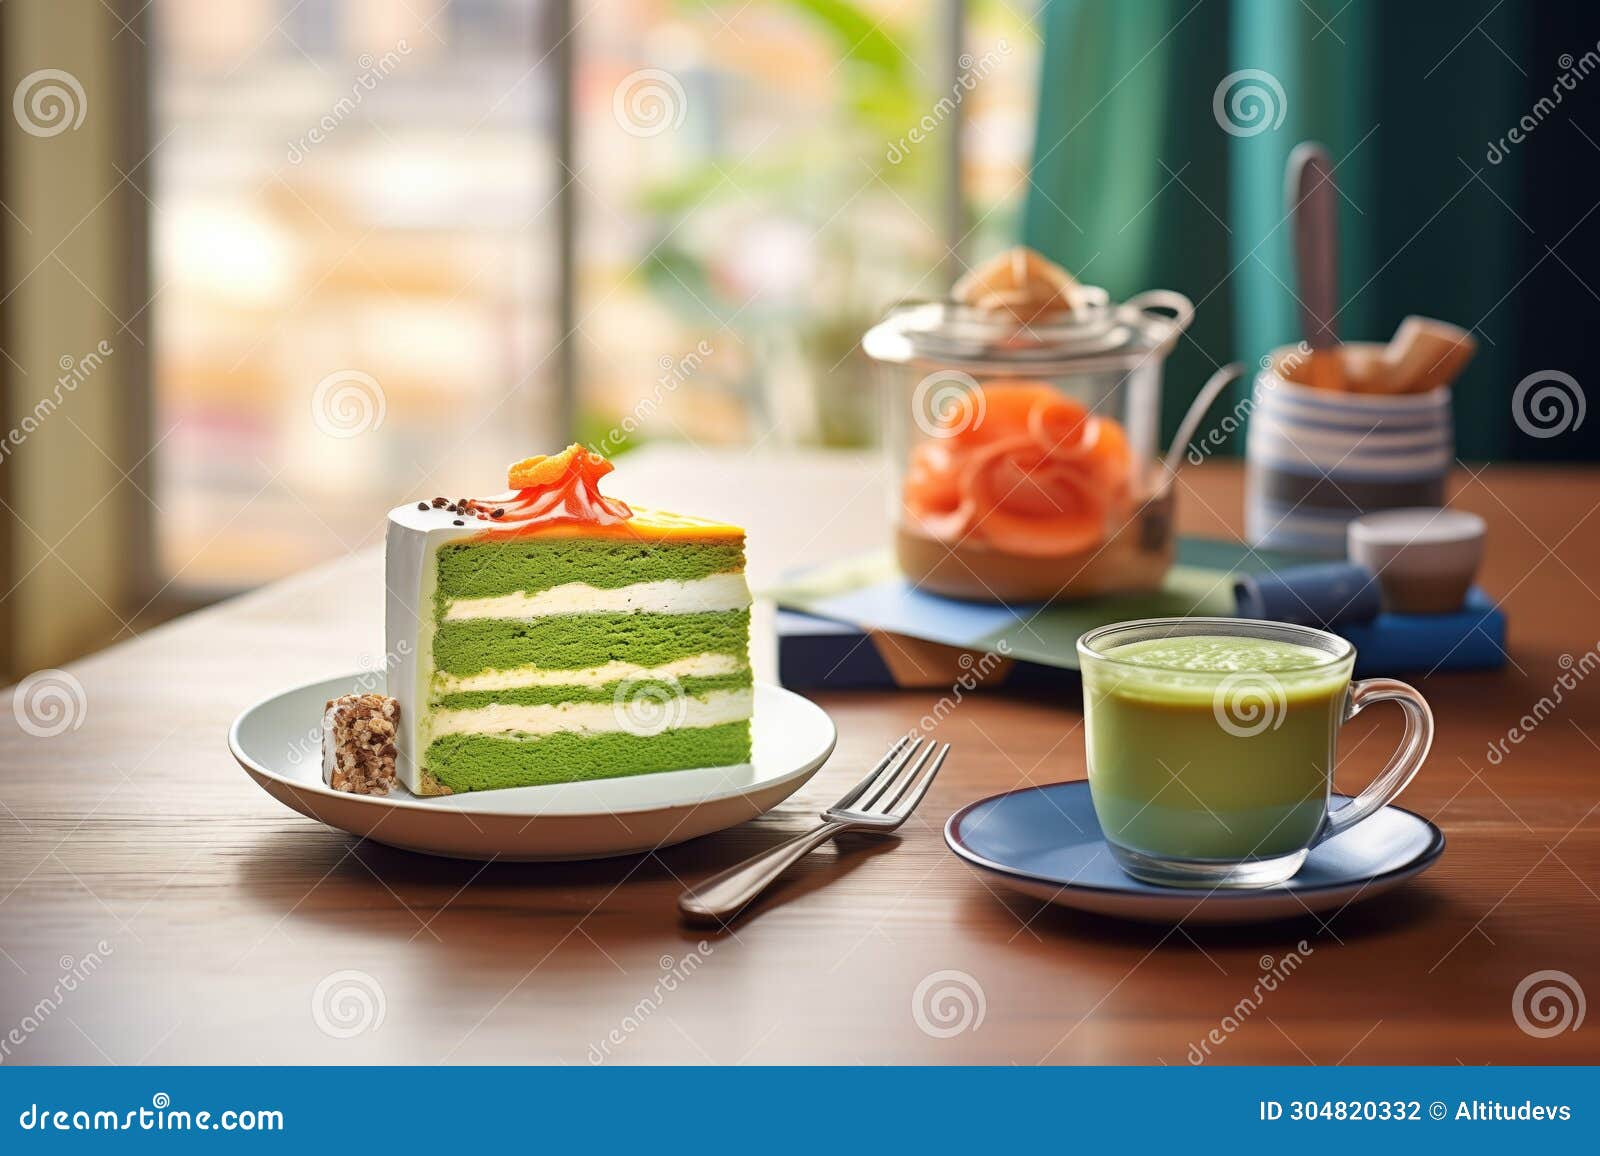 hot matcha latte with a slice of cake, caf setting